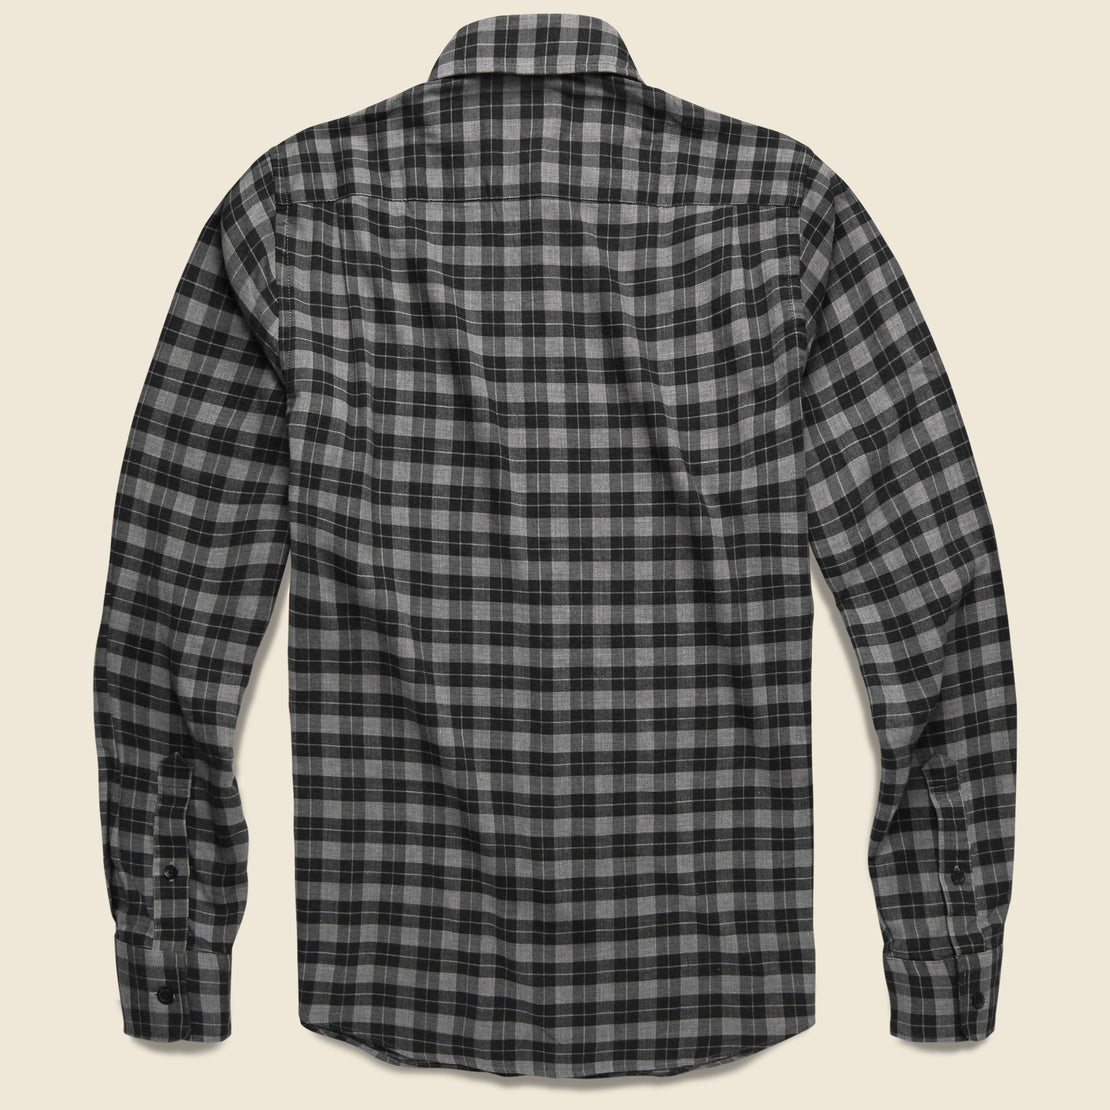 Everyday Shirt - Grey Charcoal Gingham